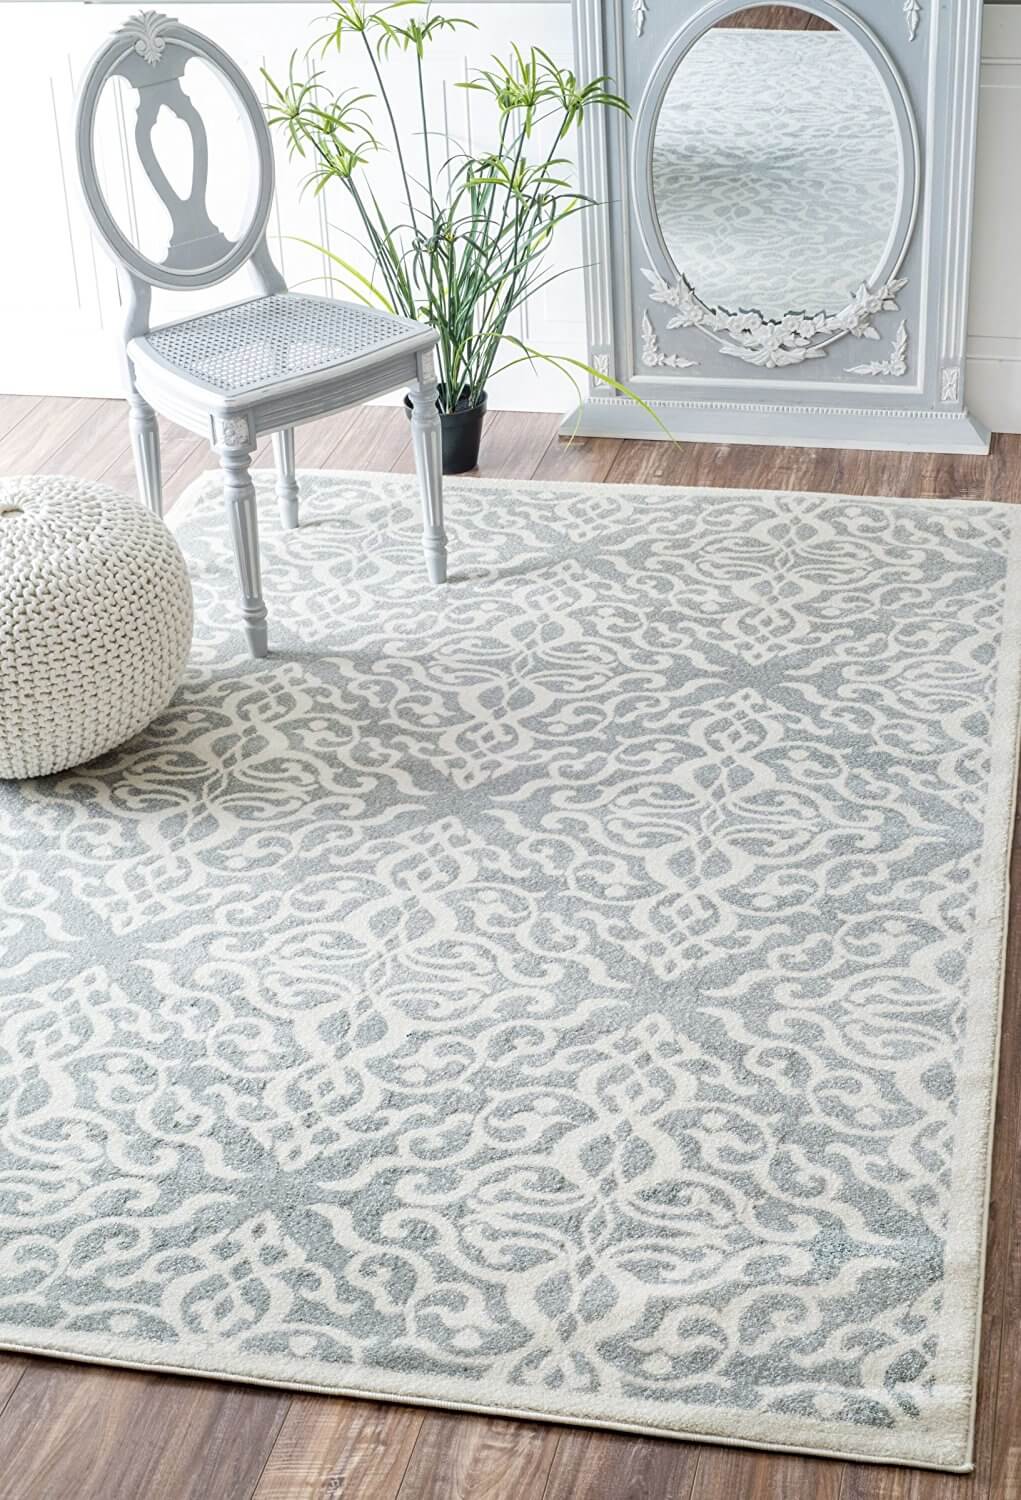 Find The Perfect Farmhouse Style Rug, Cottage Style Rugs